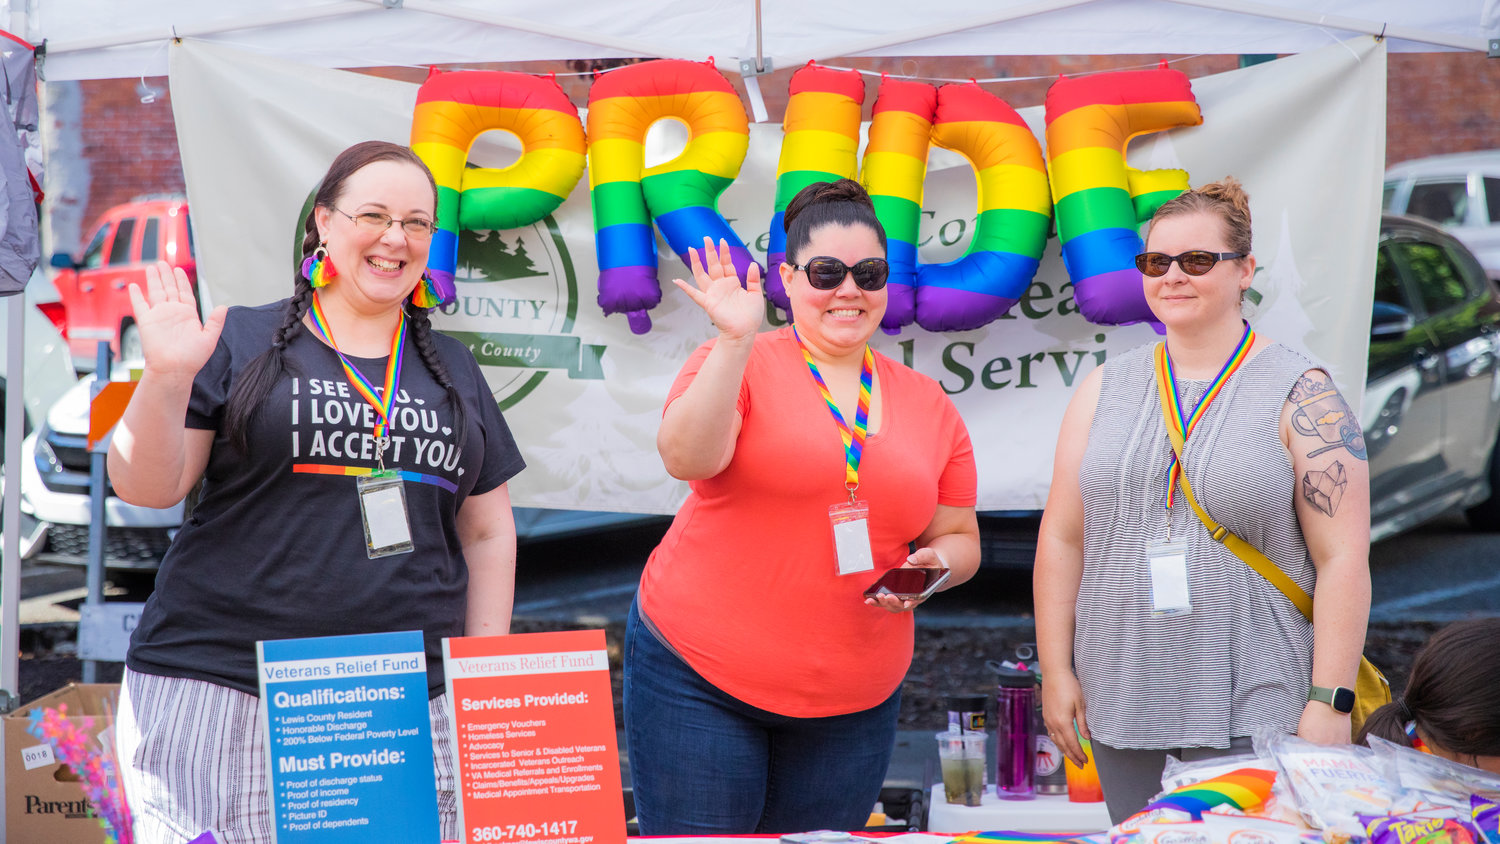 Lewis County Public Health and Social Services employees wave during a pride event in downtown Centralia Saturday morning.